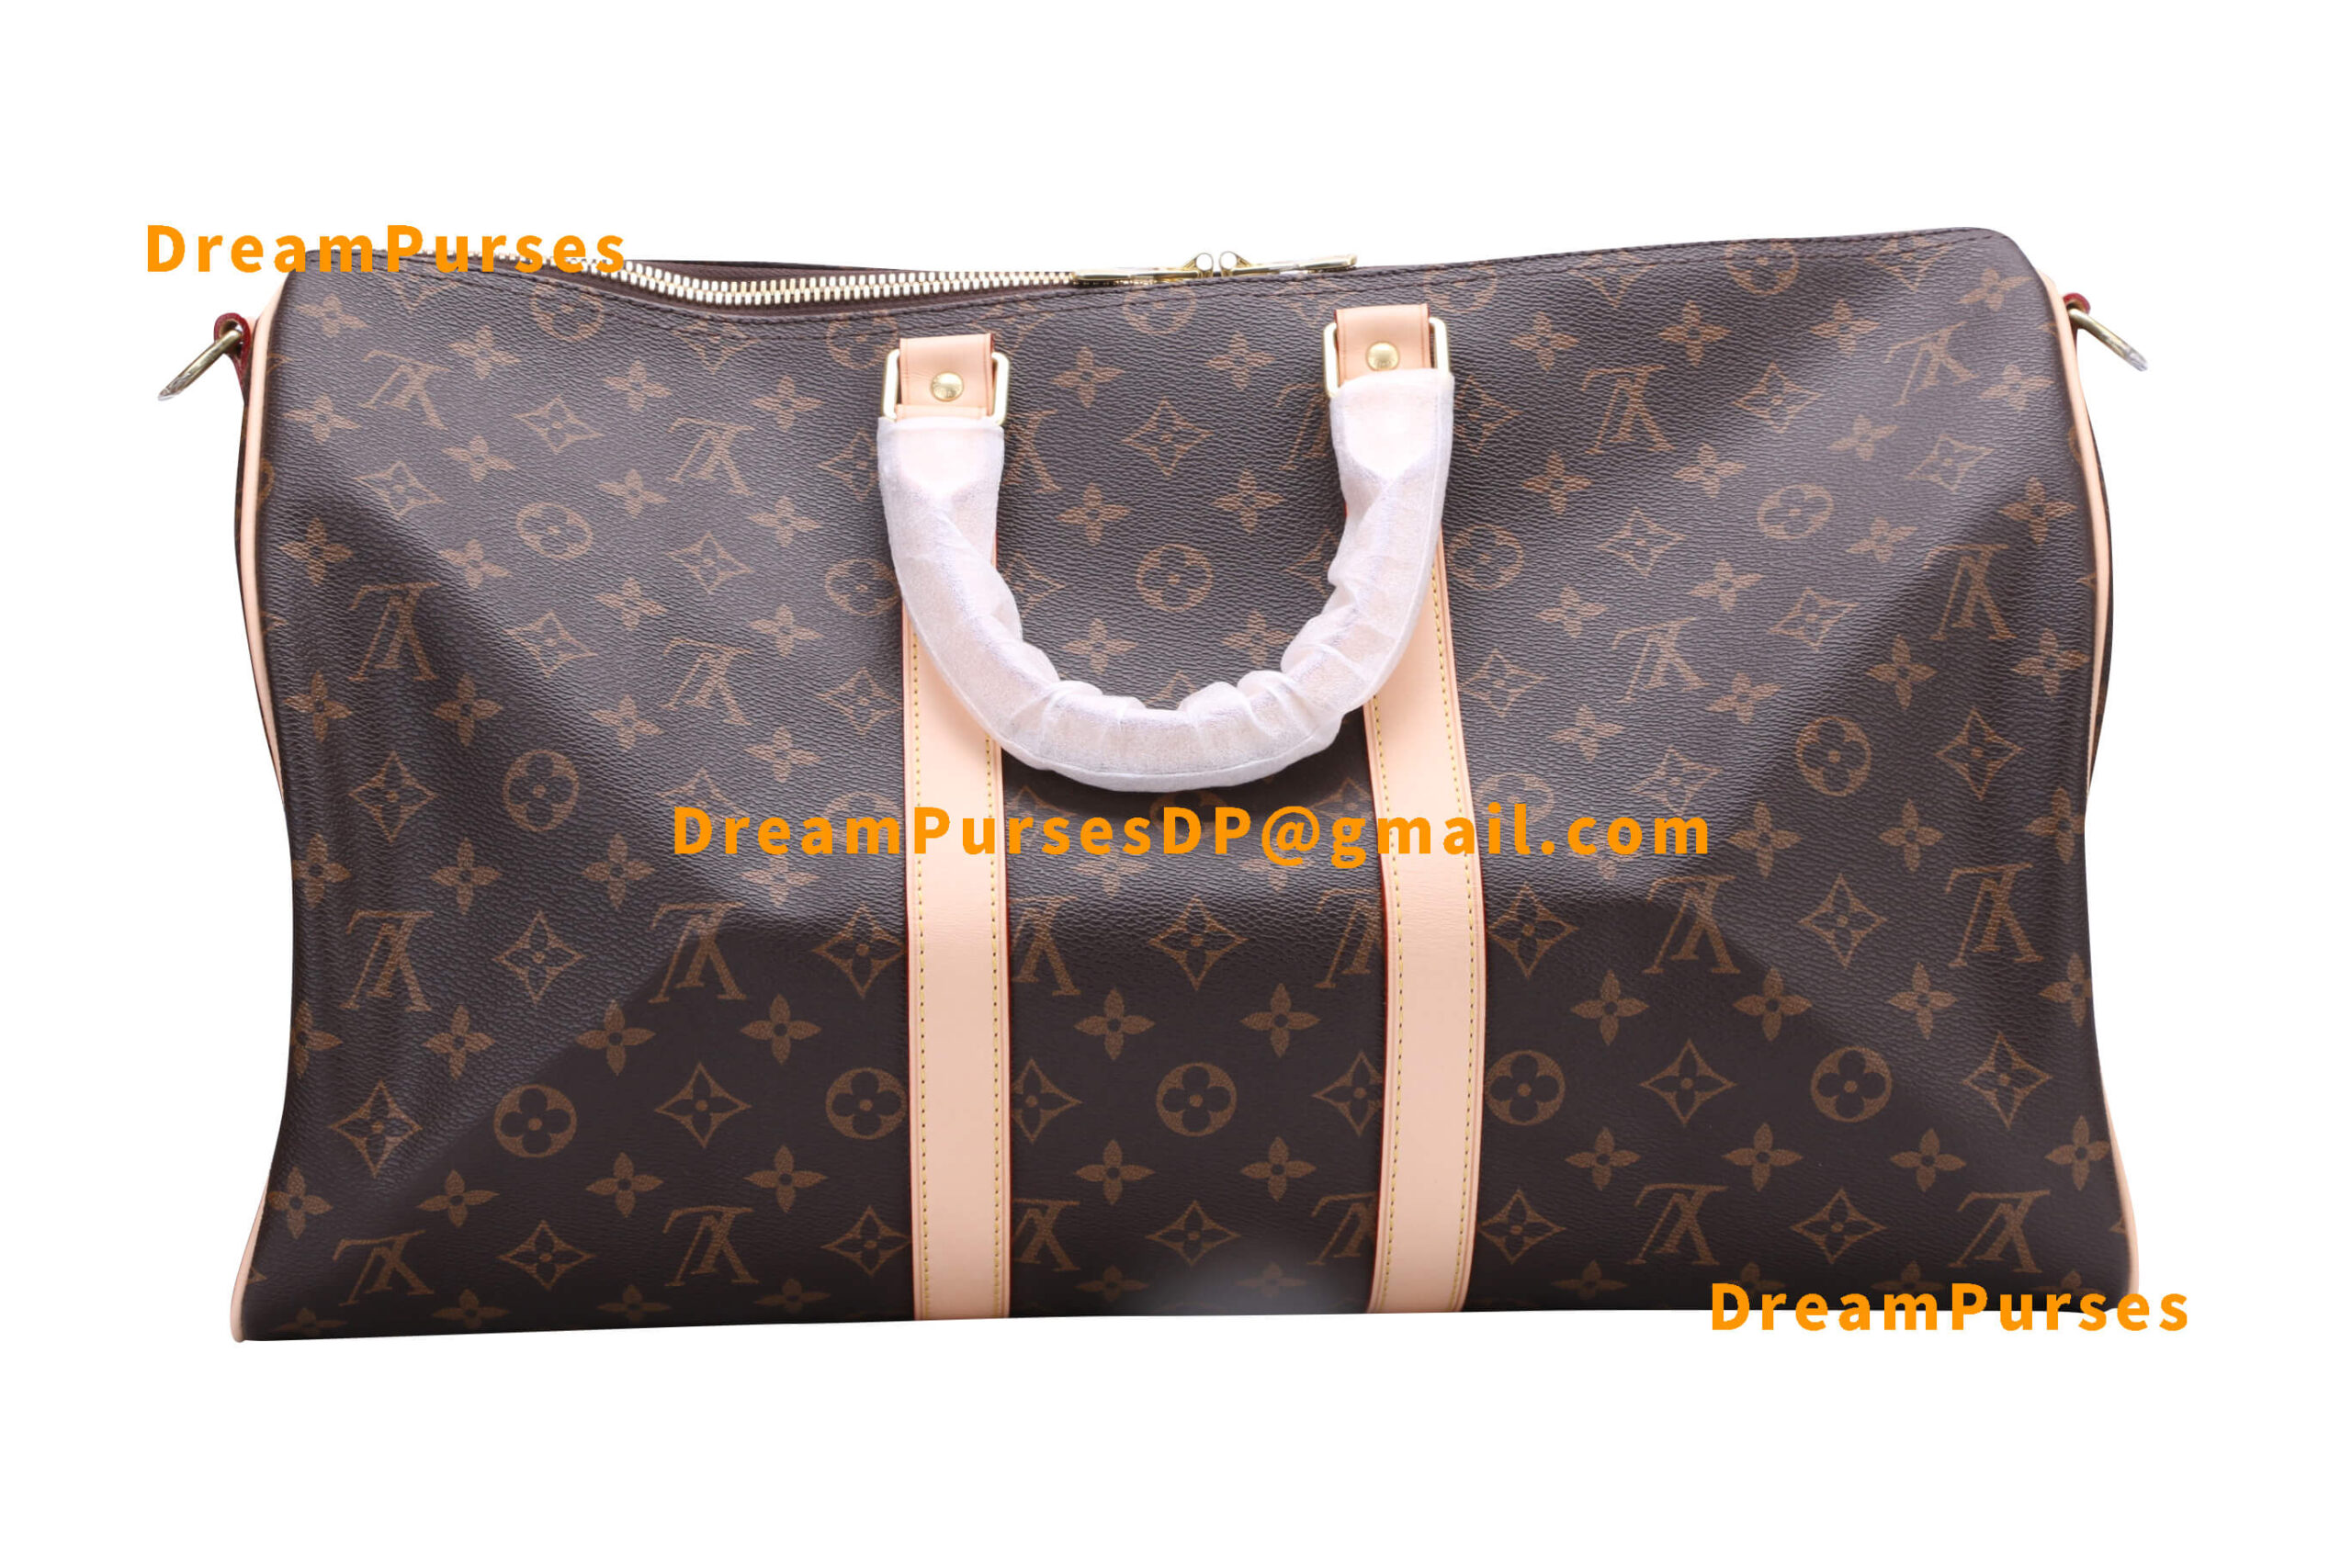 Og Radioaktiv magi Best Place to Buy Louis Vuitton Replica? (An Honest Review of Keepall Bag  Answers You Well) - DreamPurses